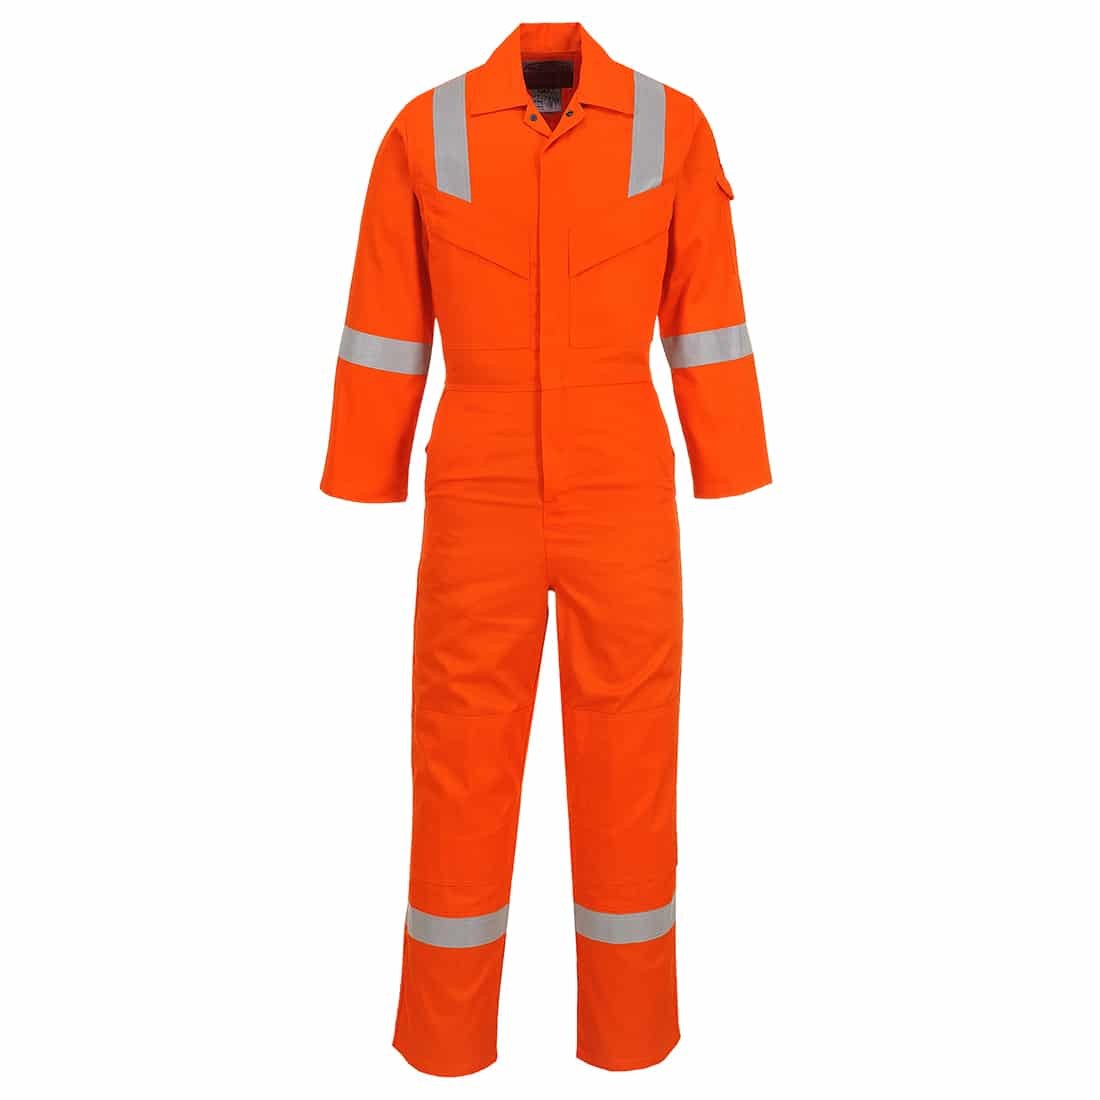 Portwest FR Antistatic Super Light Weight Coverall